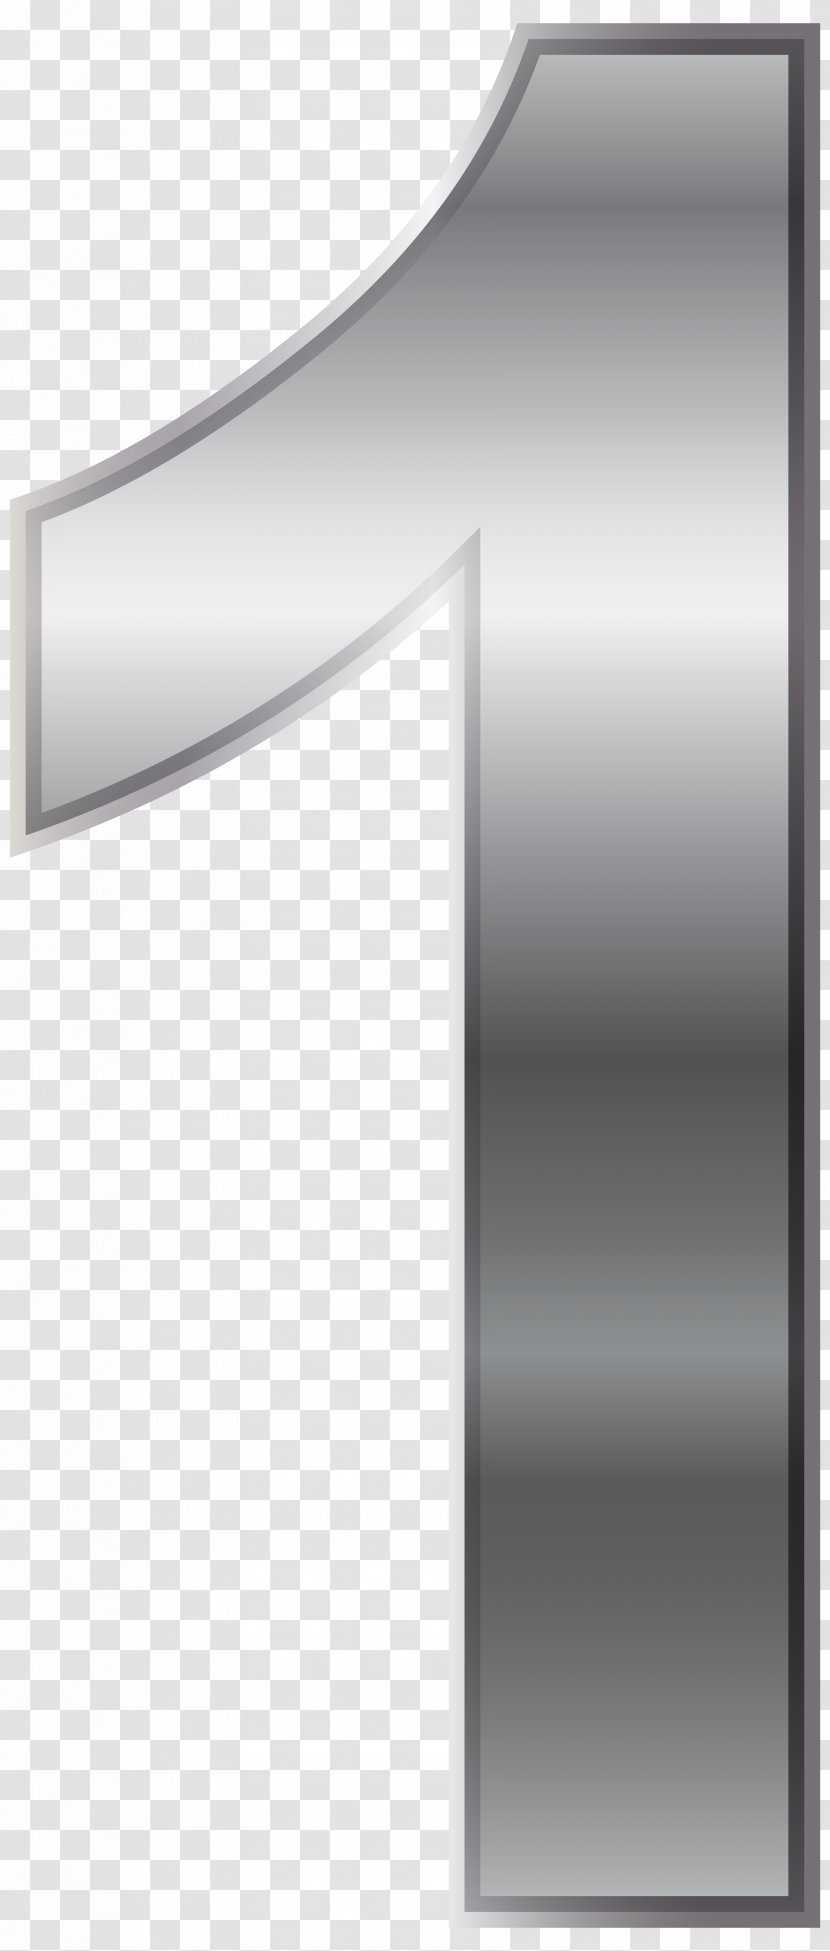 Black And White Design Angle Pattern - Silver Number One Transparent Clip Art Image Transparent PNG